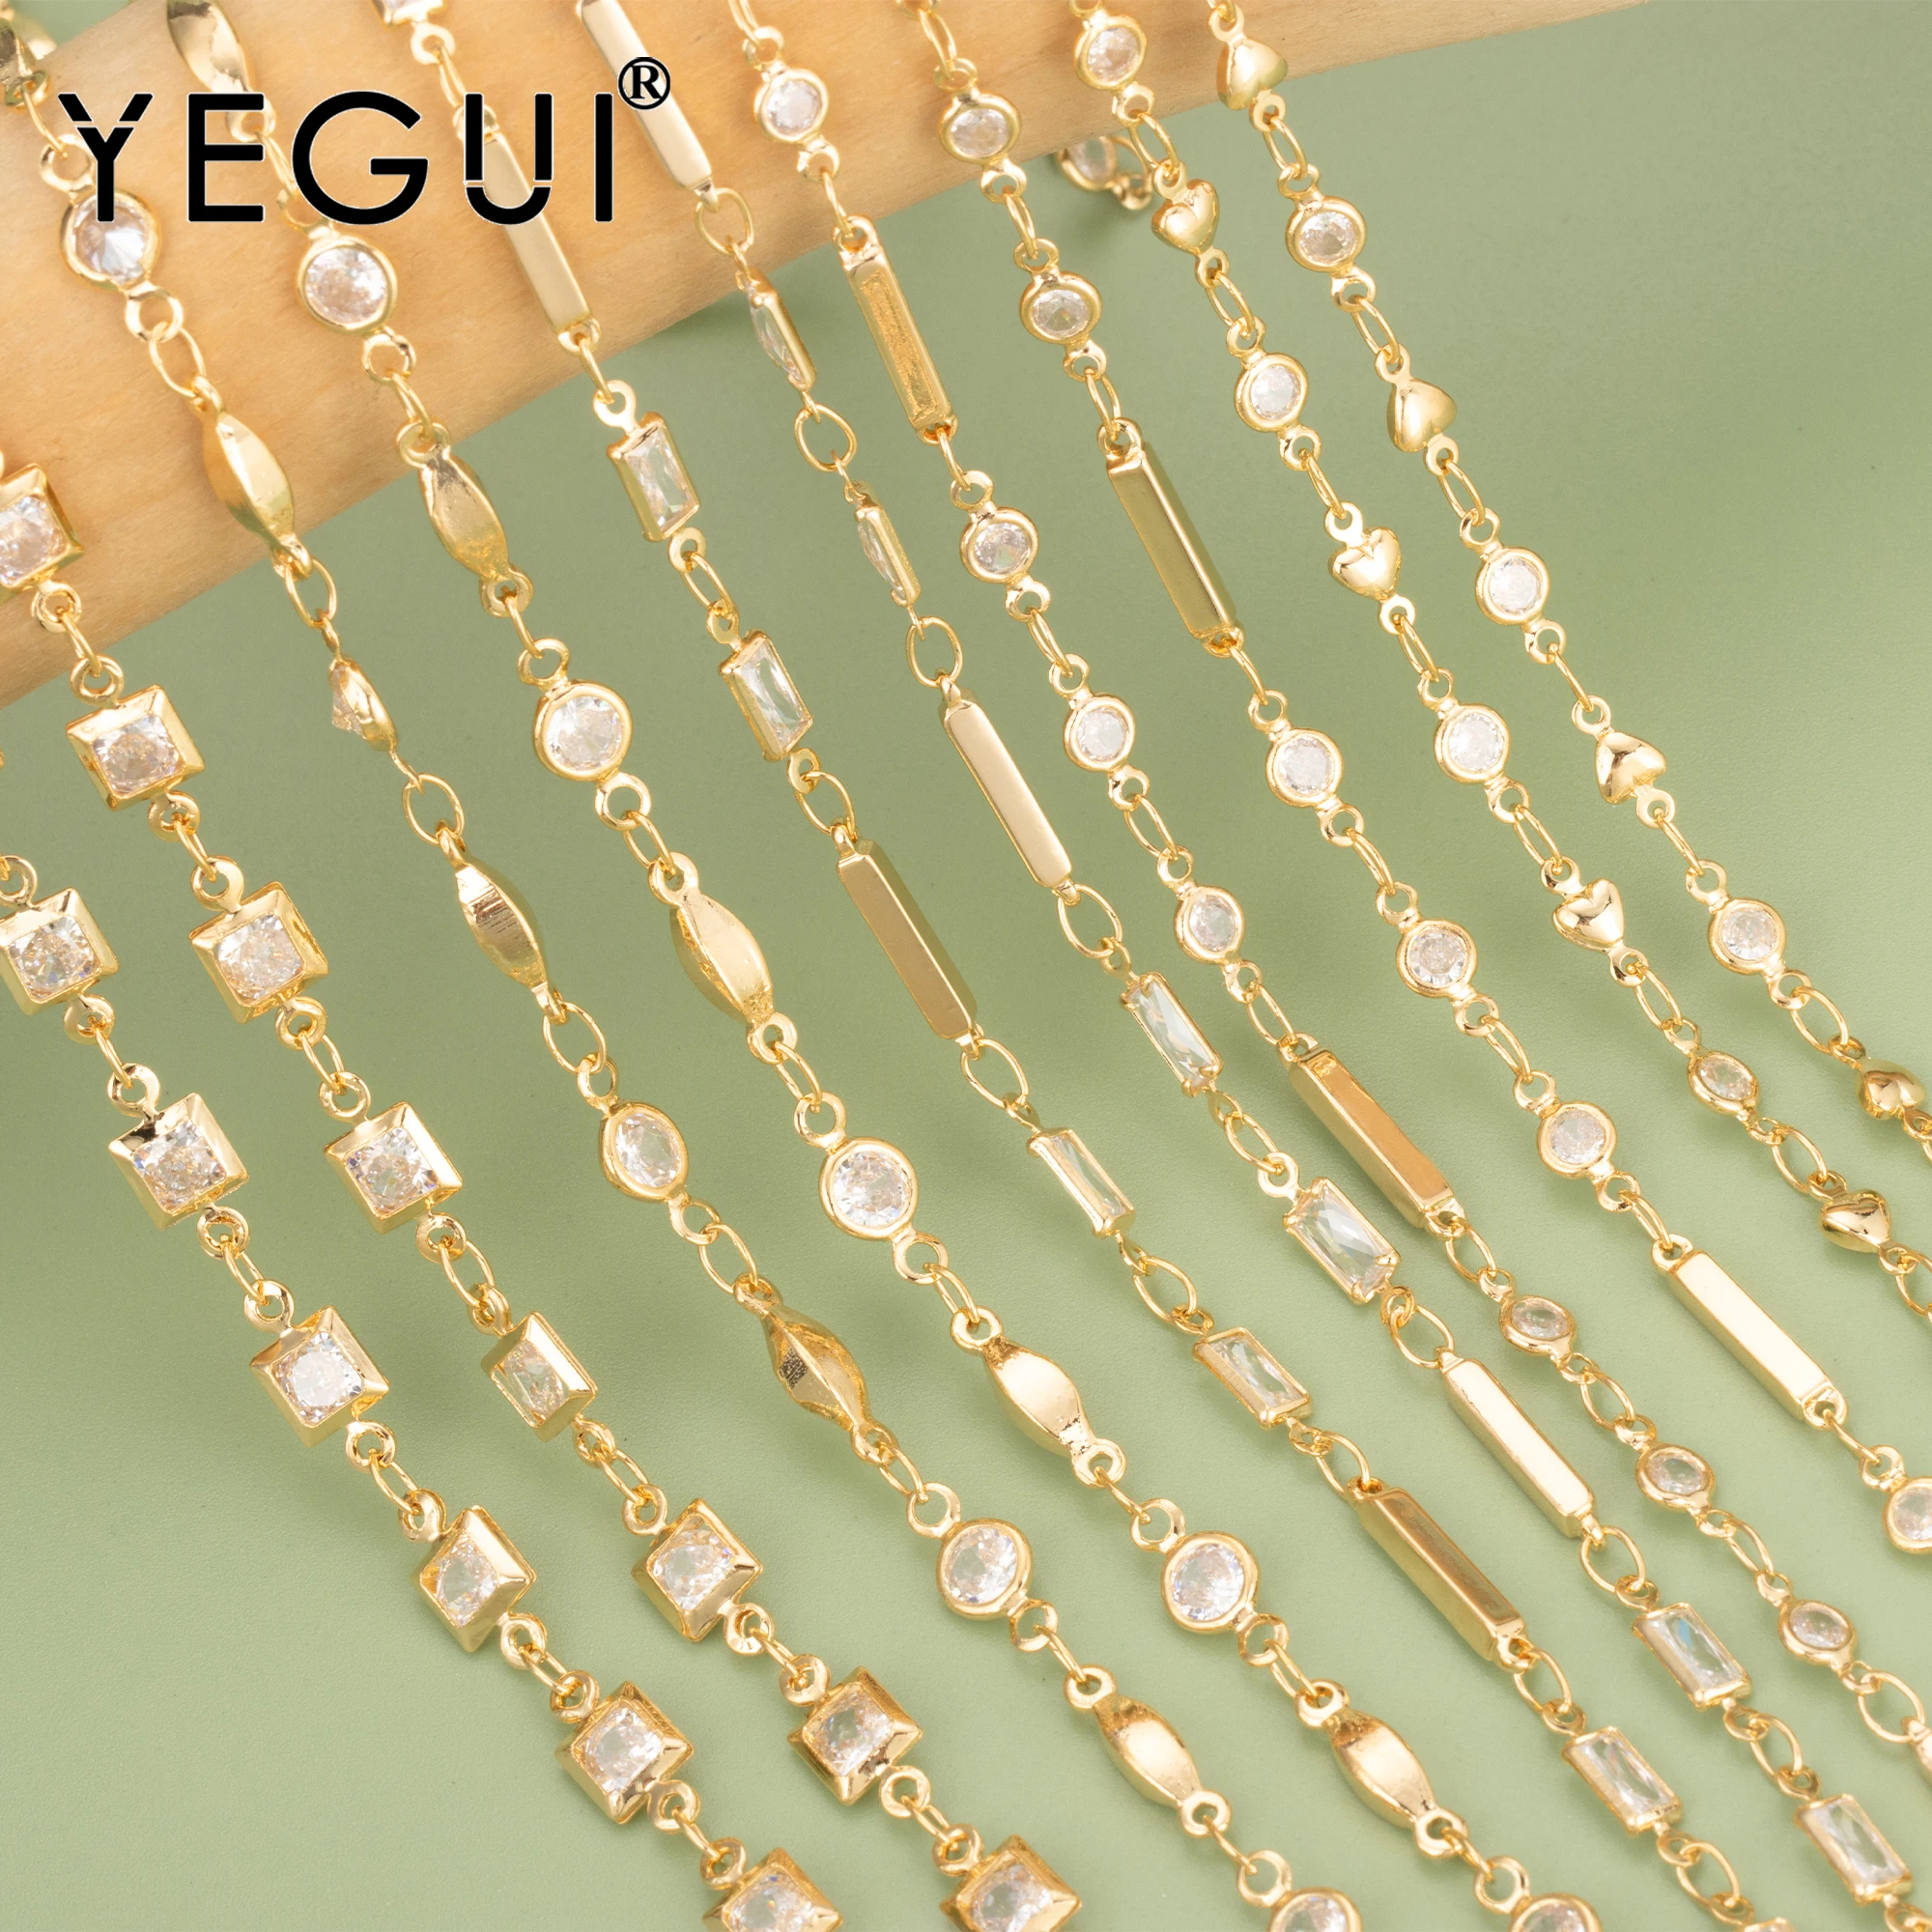 

YEGUI C160,diy chain,18k gold plated,0.3microns,copper metal,zircon,hand made,diy bracelet necklace,jewelry making,1m/lot